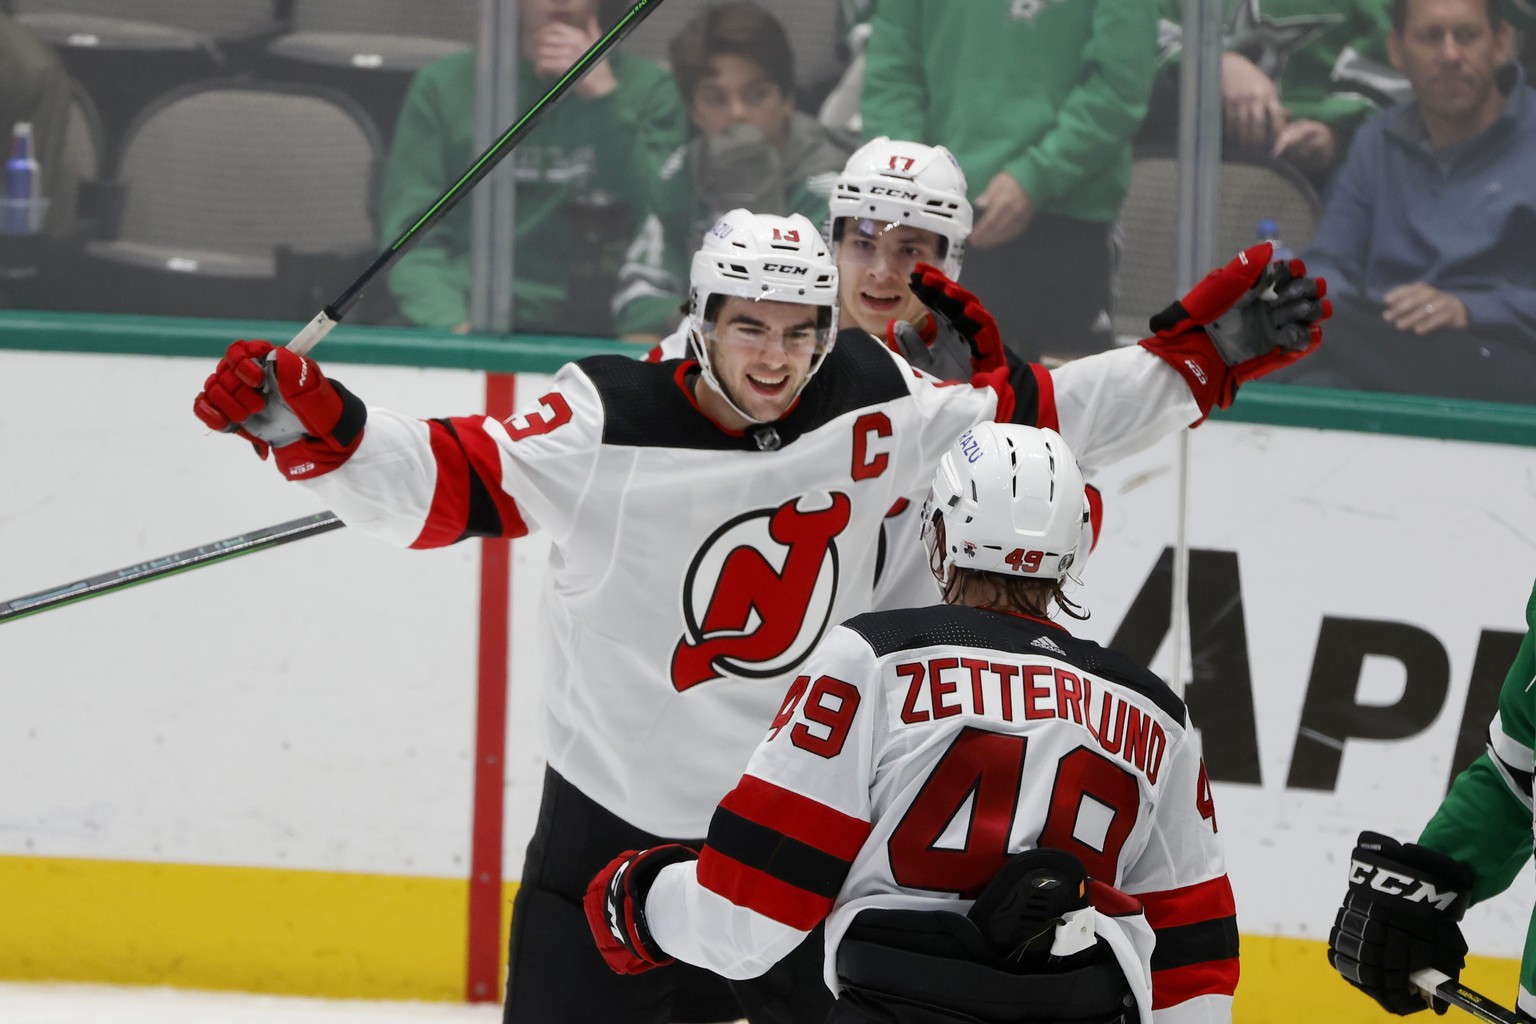 New Jersey Devils center Nico Hischier (13) celebrates his goal against the Dallas Stars with center Yegor Sharangovich (17) and left wing Fabian Zetterlund (49) during the third period of an NHL hock ...